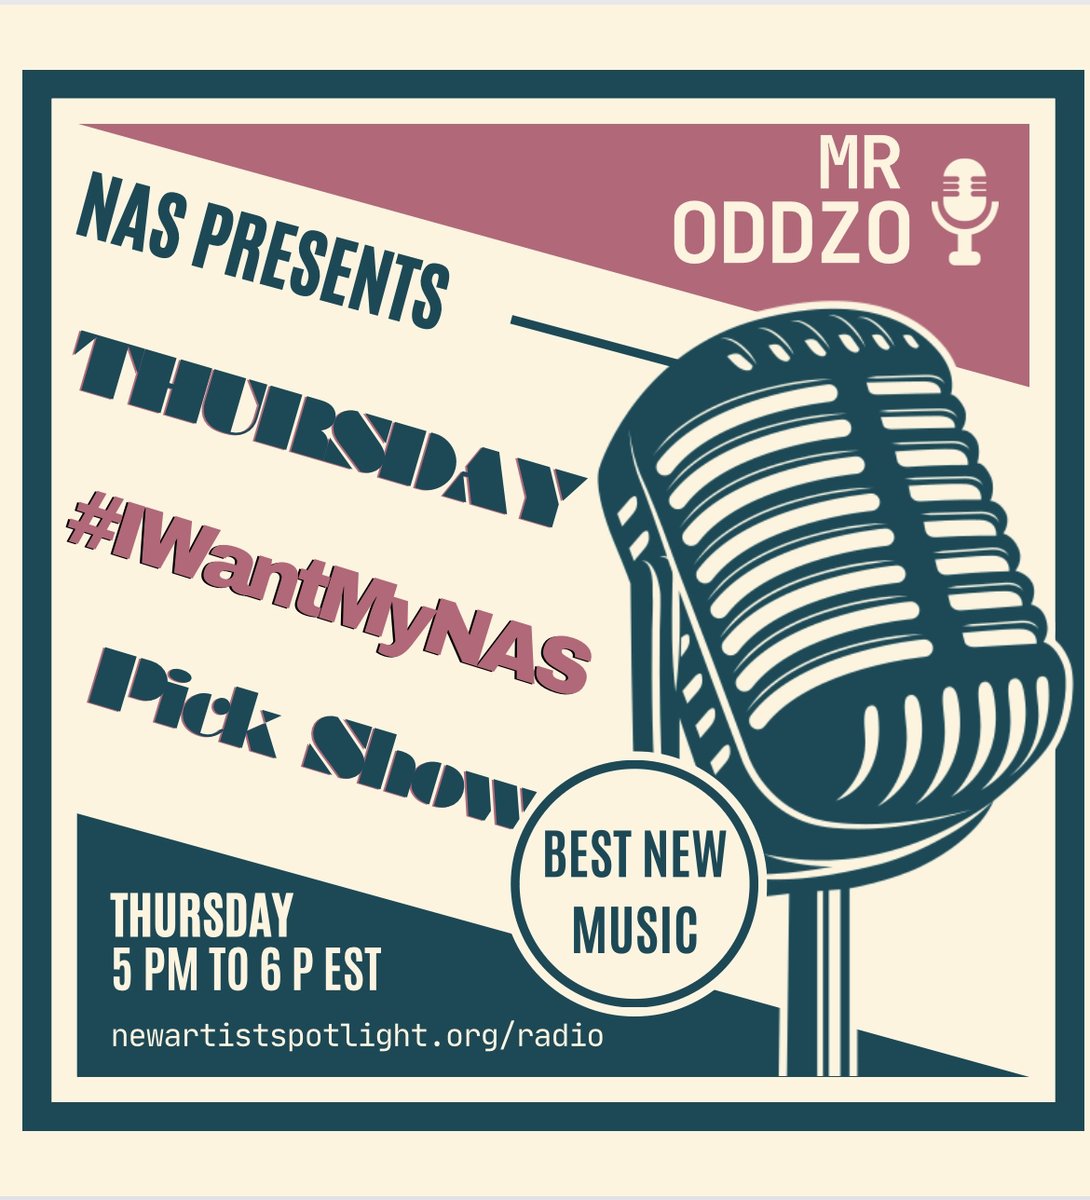 Today at 2PM PT | 5PM ET | 9PM GMT on @NASIndieRadio @MrOddzo's Thurs Pick Show! 🎯 Key of F @mapofautumn @EmilyGraymusic @andelectro_band @ForestOFangHorn @CaitlinGoulet @ElectricSolPHX @BillLovitt @7streamsmusic @Katanak_Music @BlondeSynthetik & a special NAS collab premiere!